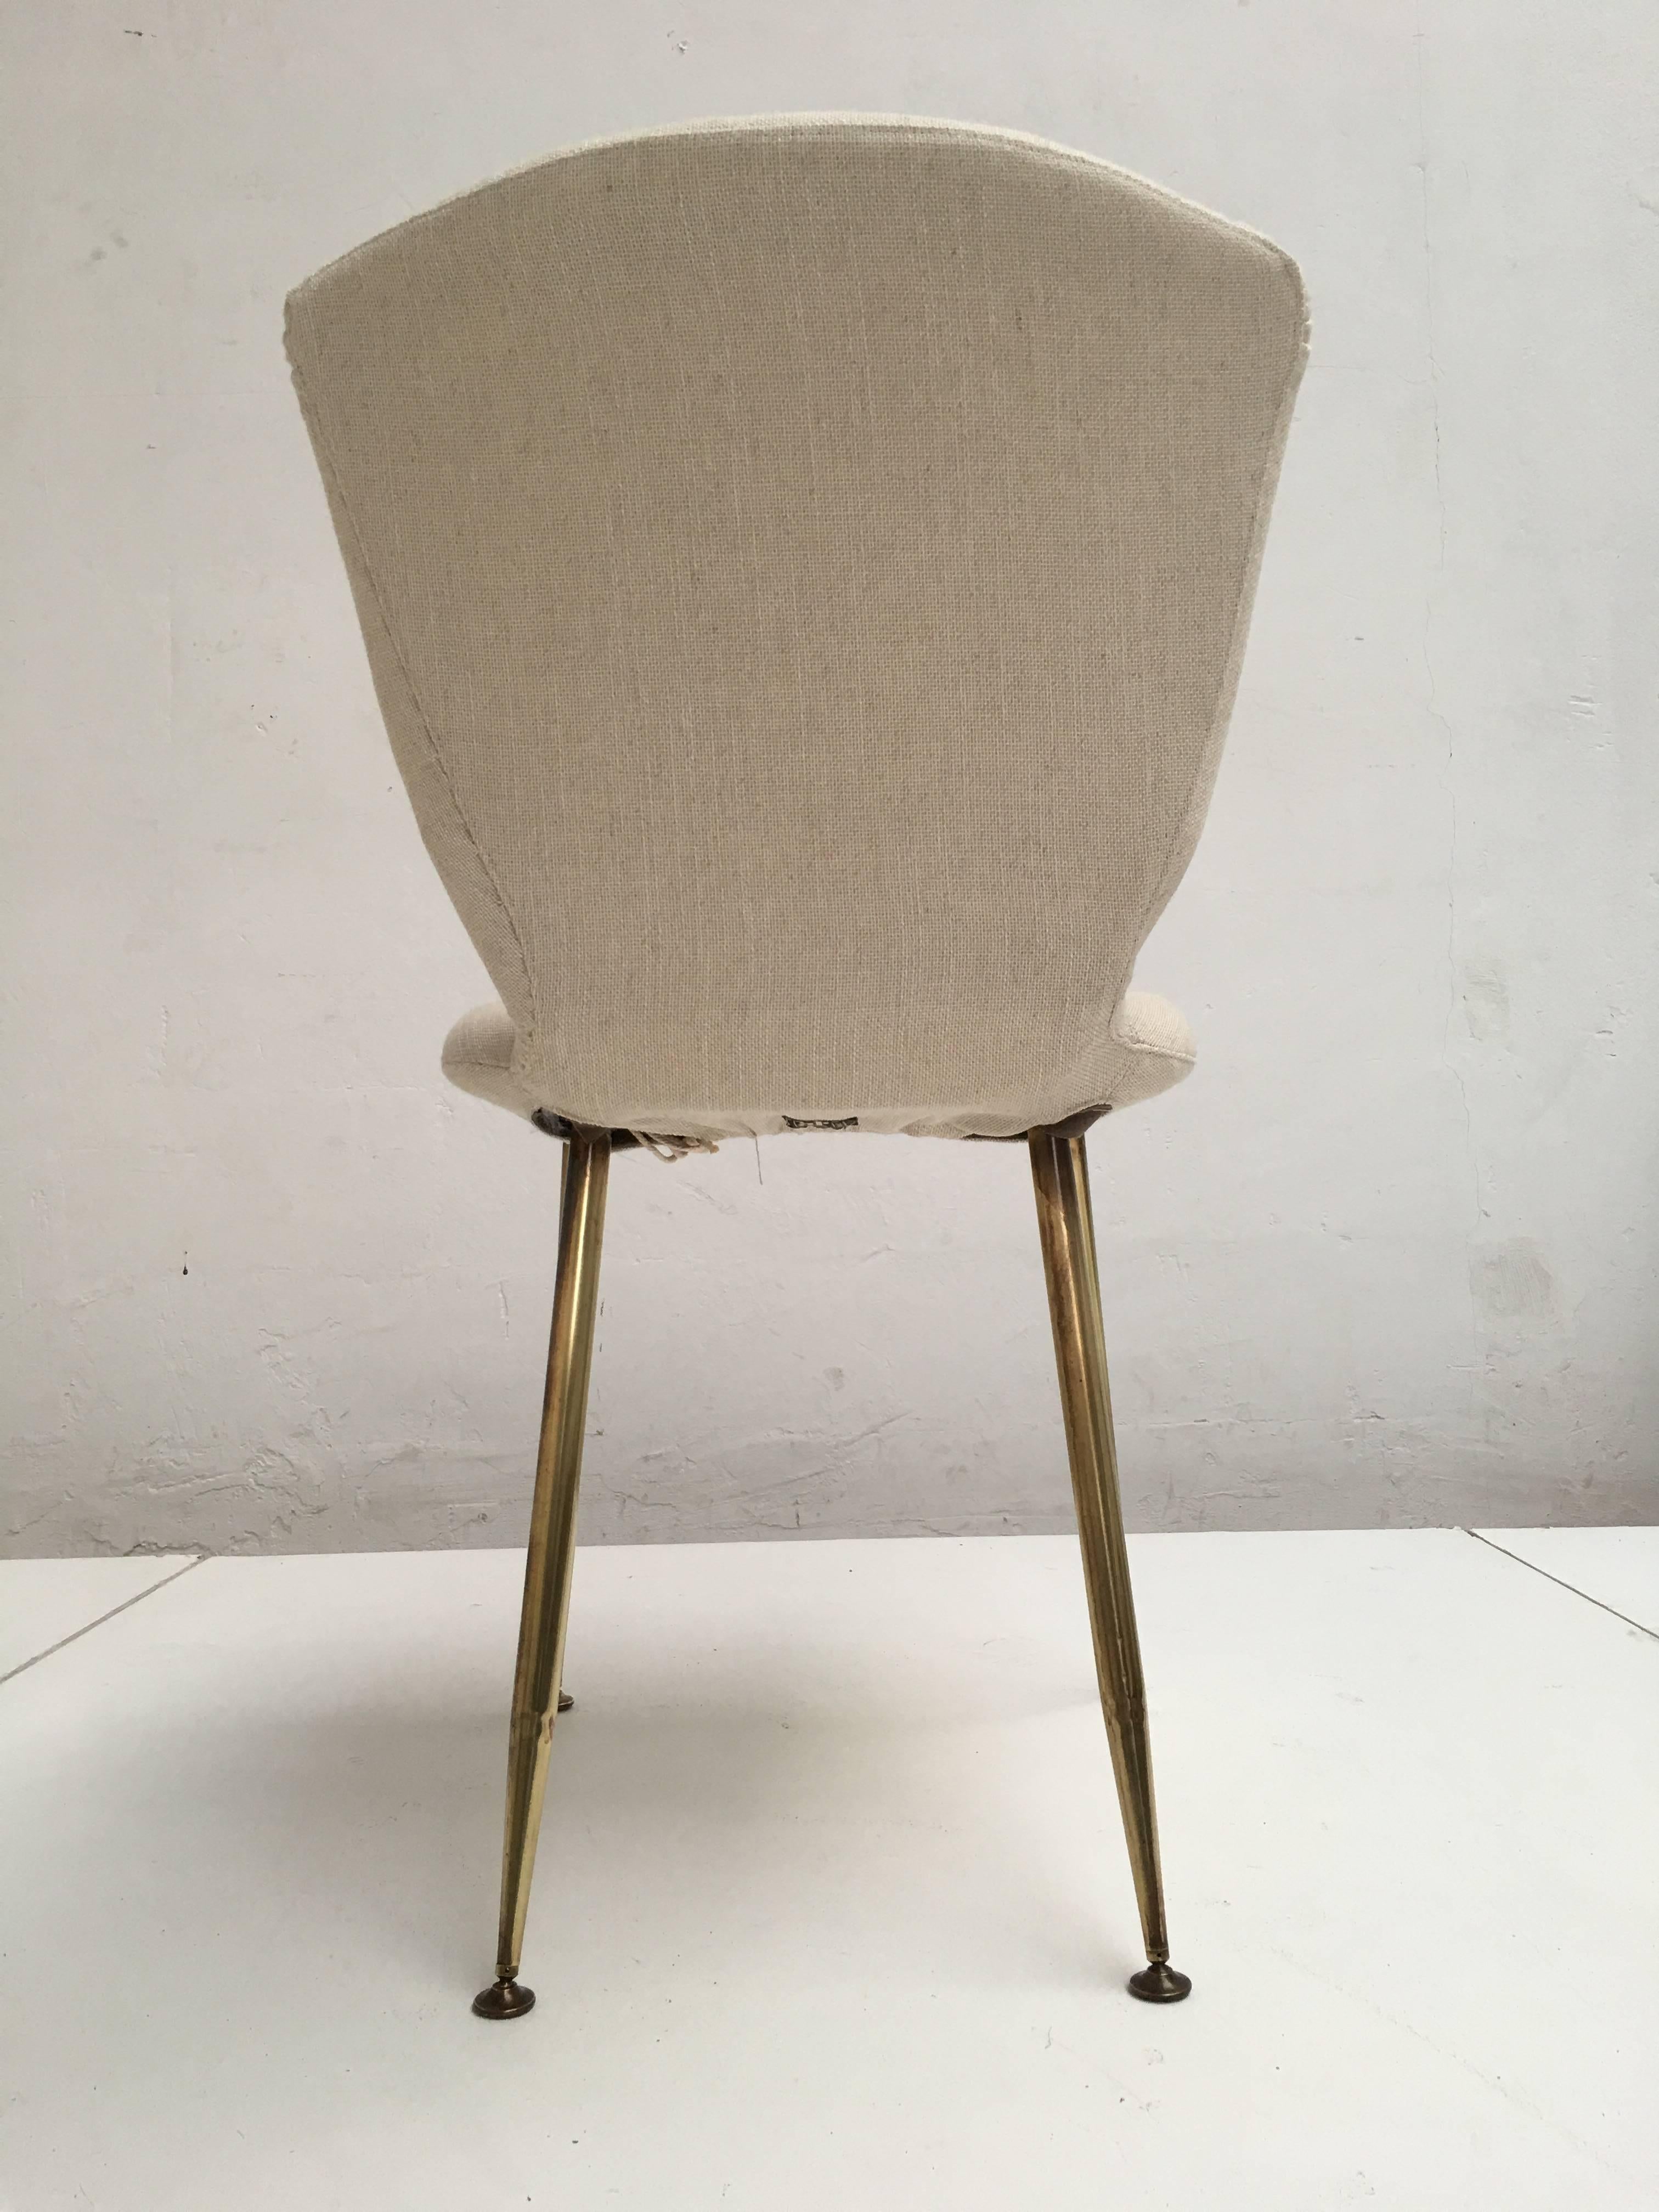 Mid-20th Century 10 Dining Chairs by Louis Sognot for Arflex, 1959, brass legs, Upholstery Restored